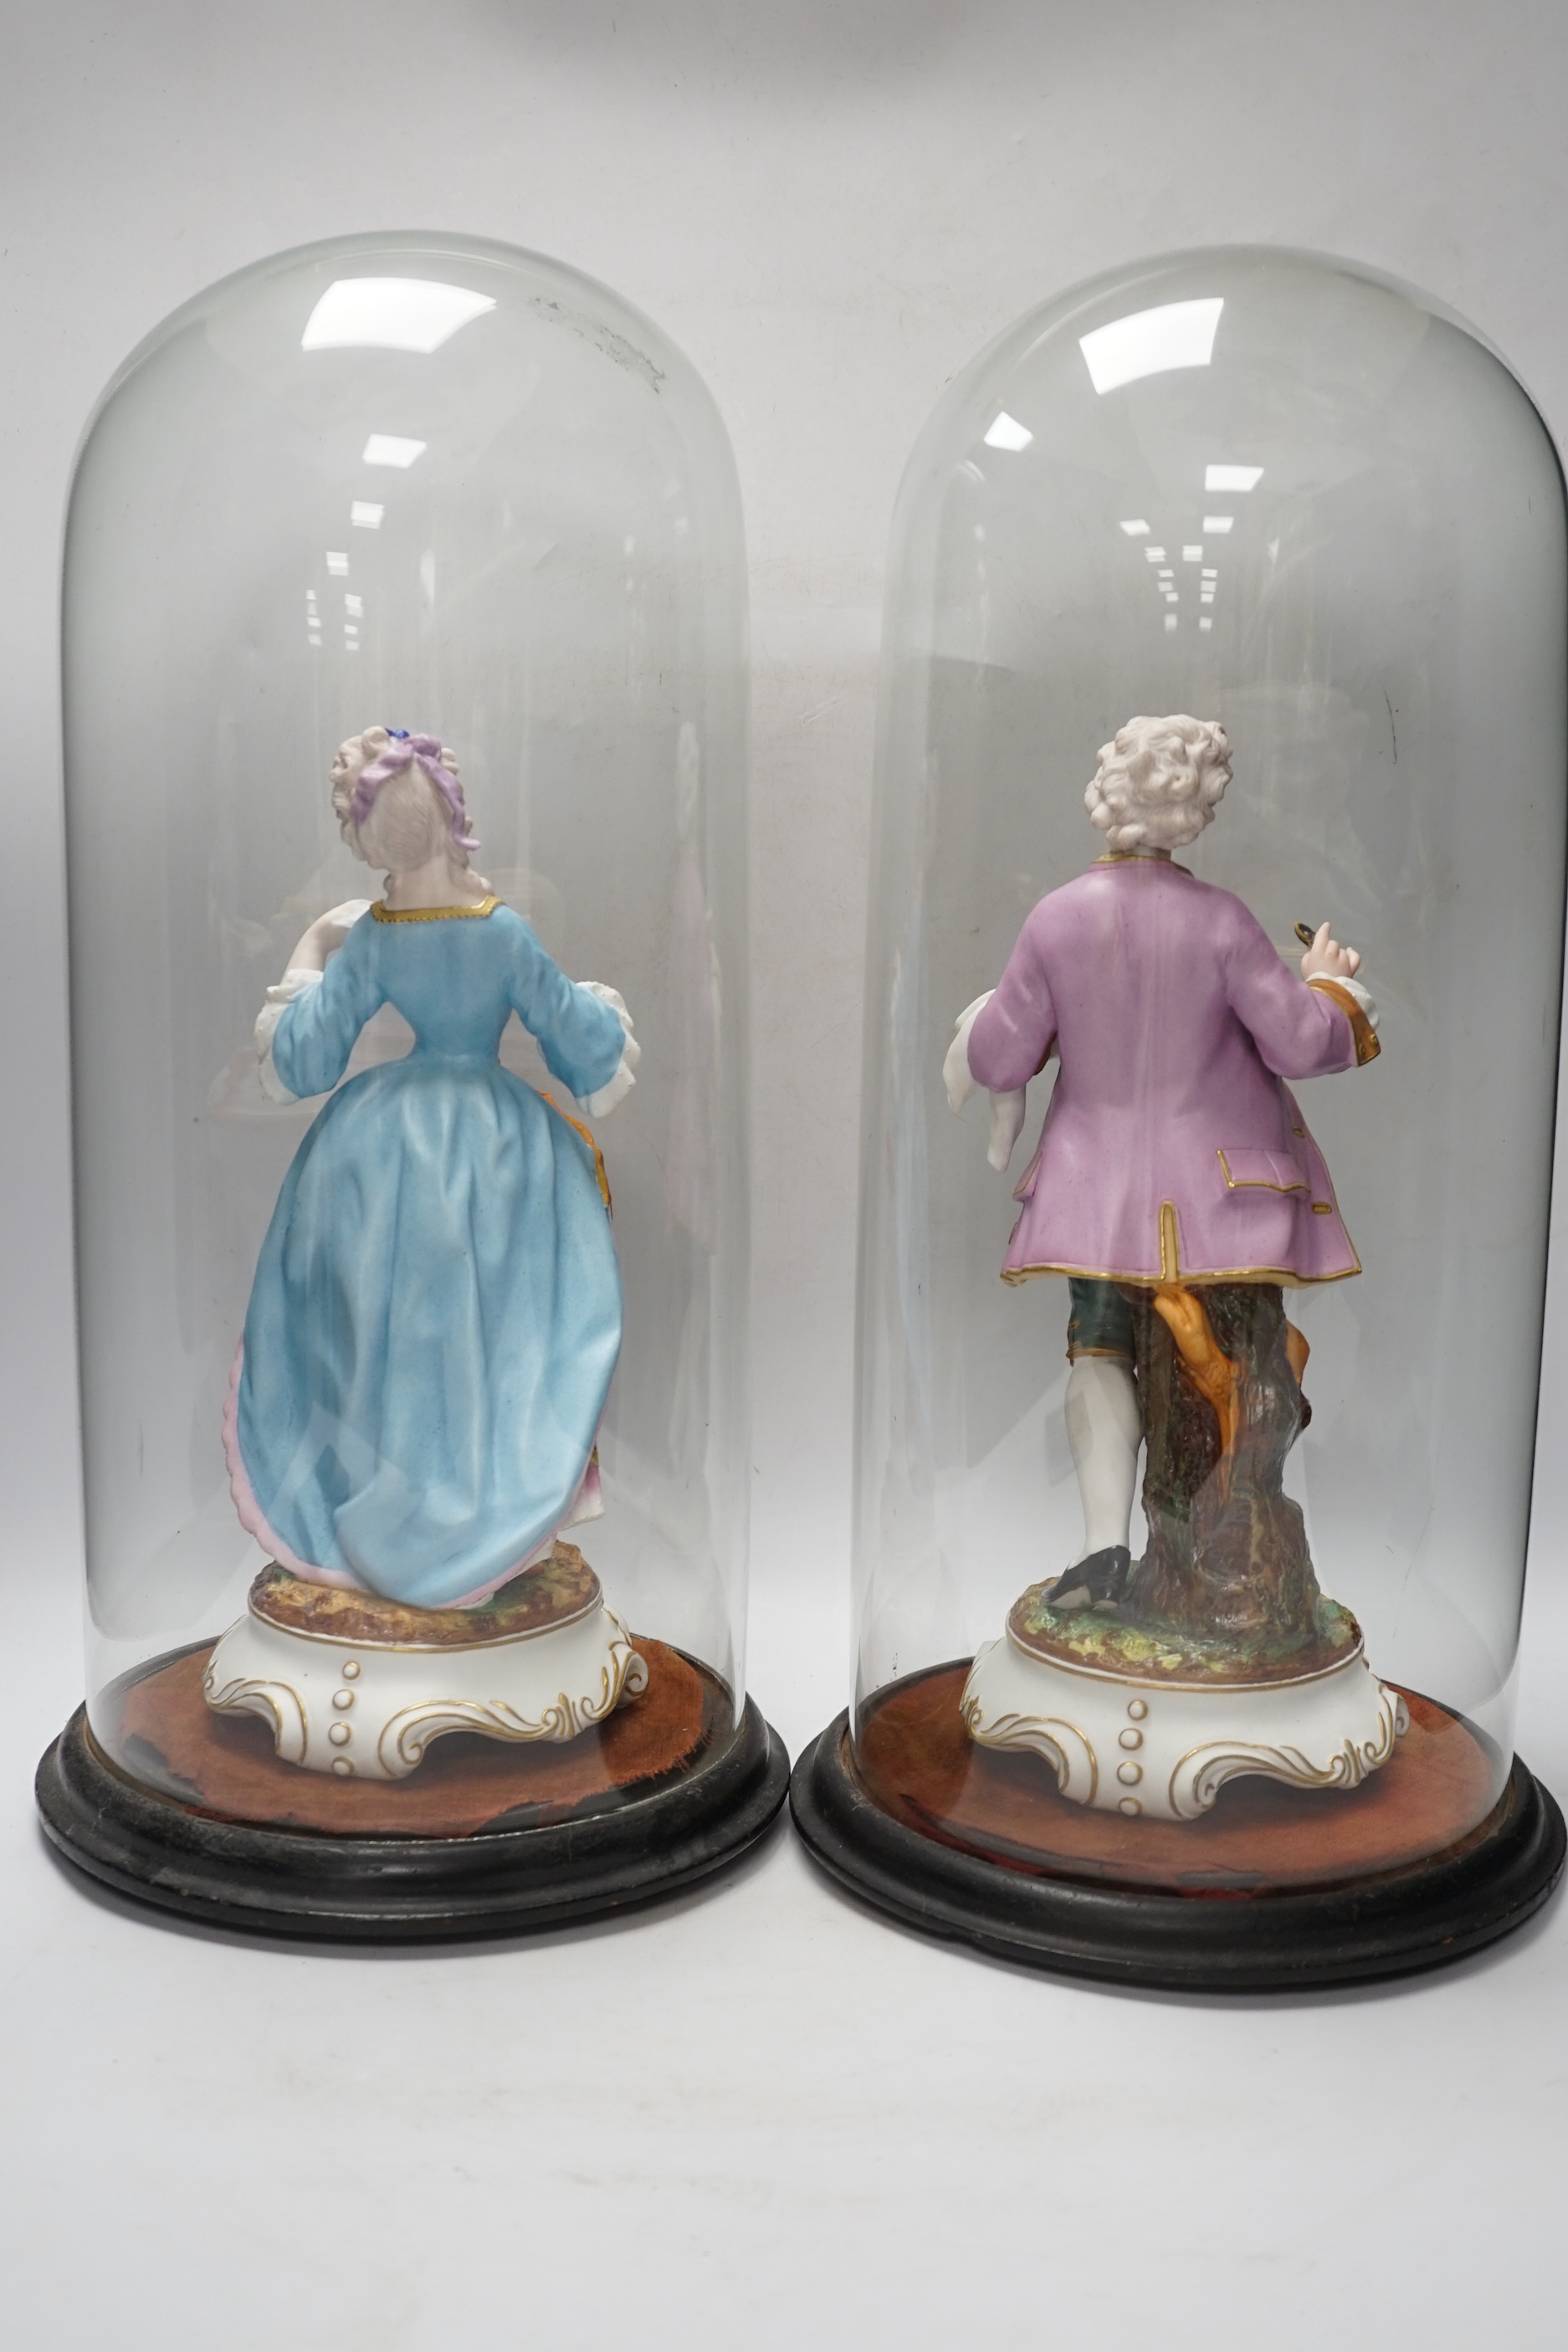 A pair of continental bisque porcelain figures, under glass domes, 48cm overall